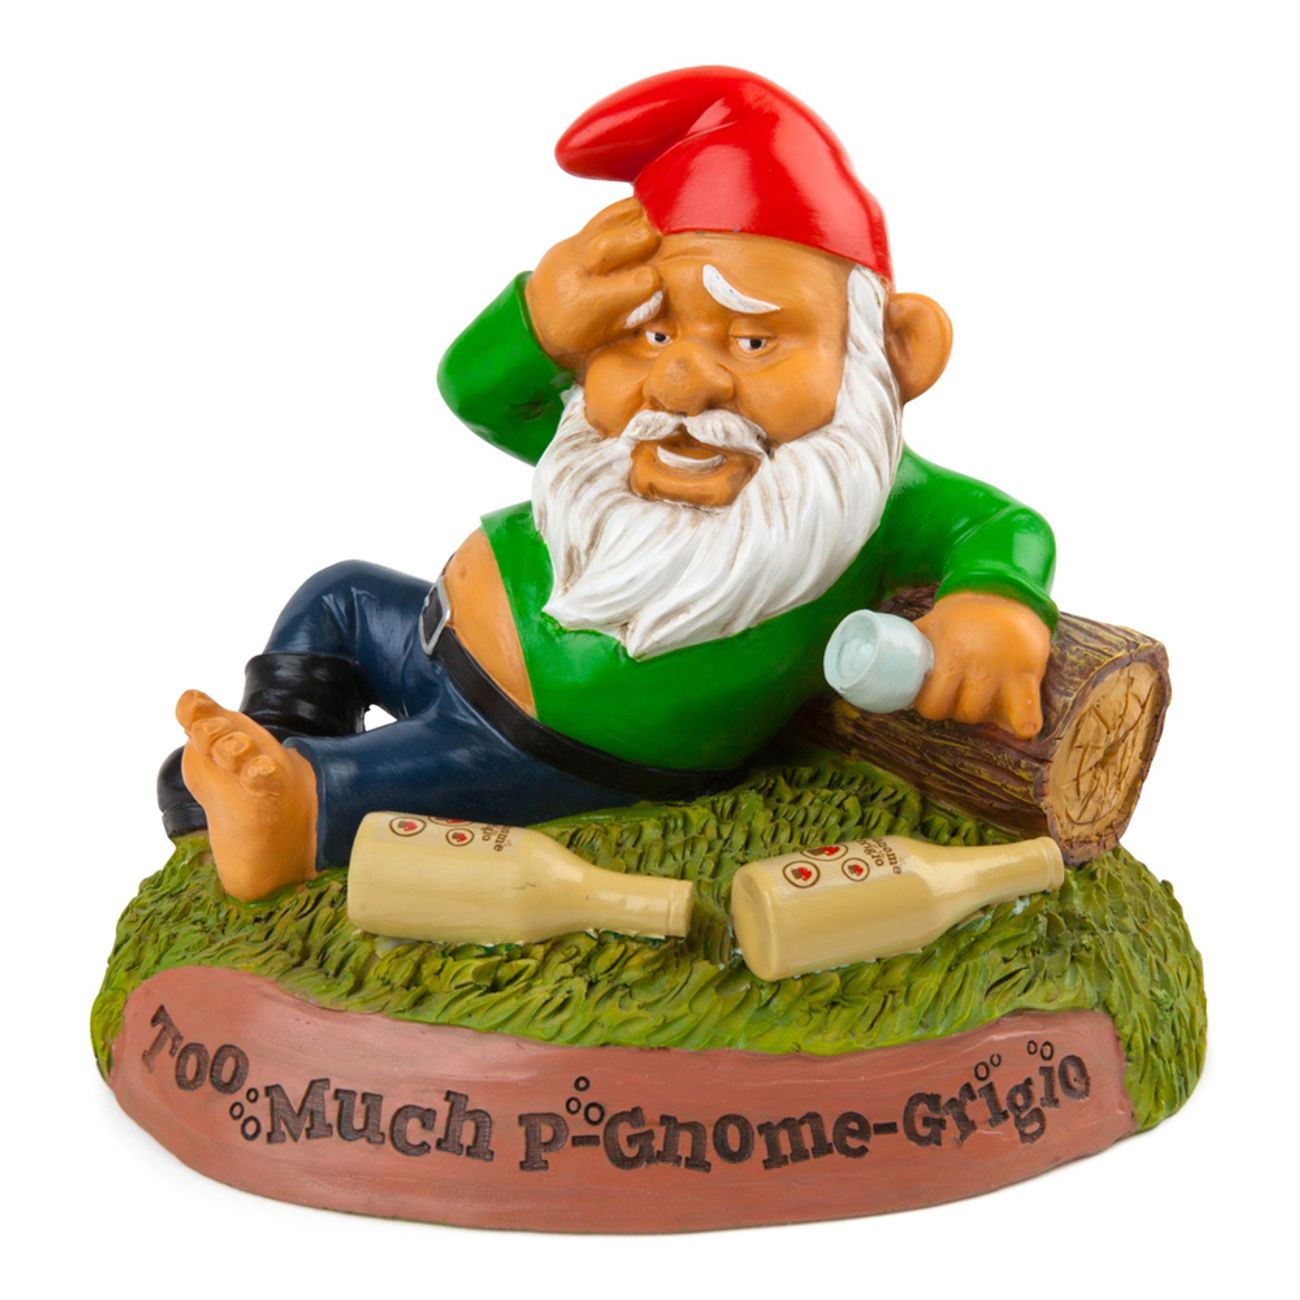 tradgardstomte-hungover-gnome-1